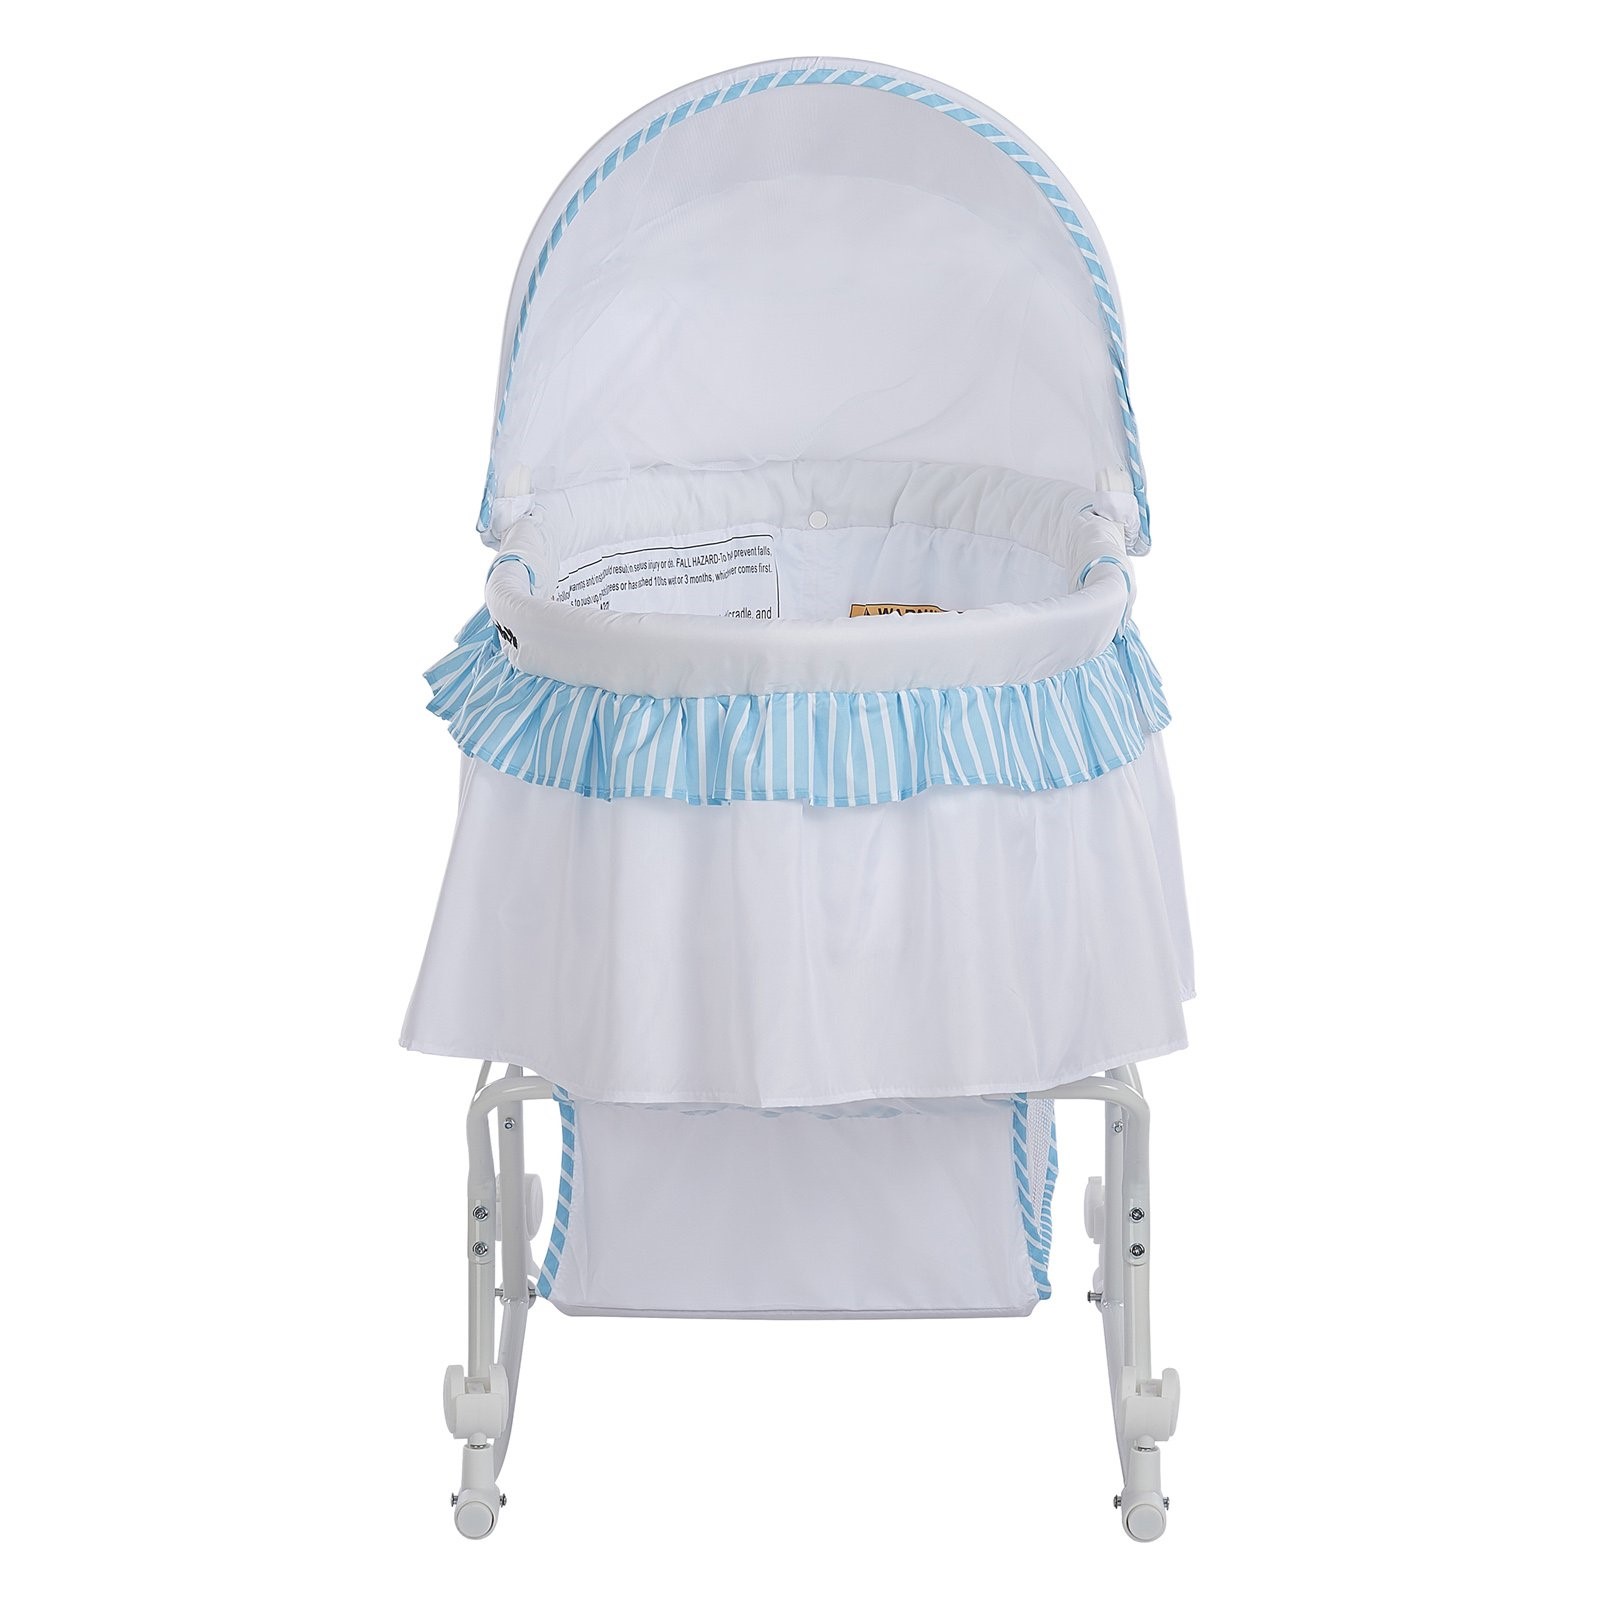 Dream On Me Lacy Portable 2-in-1 Bassinet & Cradle in Pink and White, Lightweight Baby Bassinet - image 5 of 7